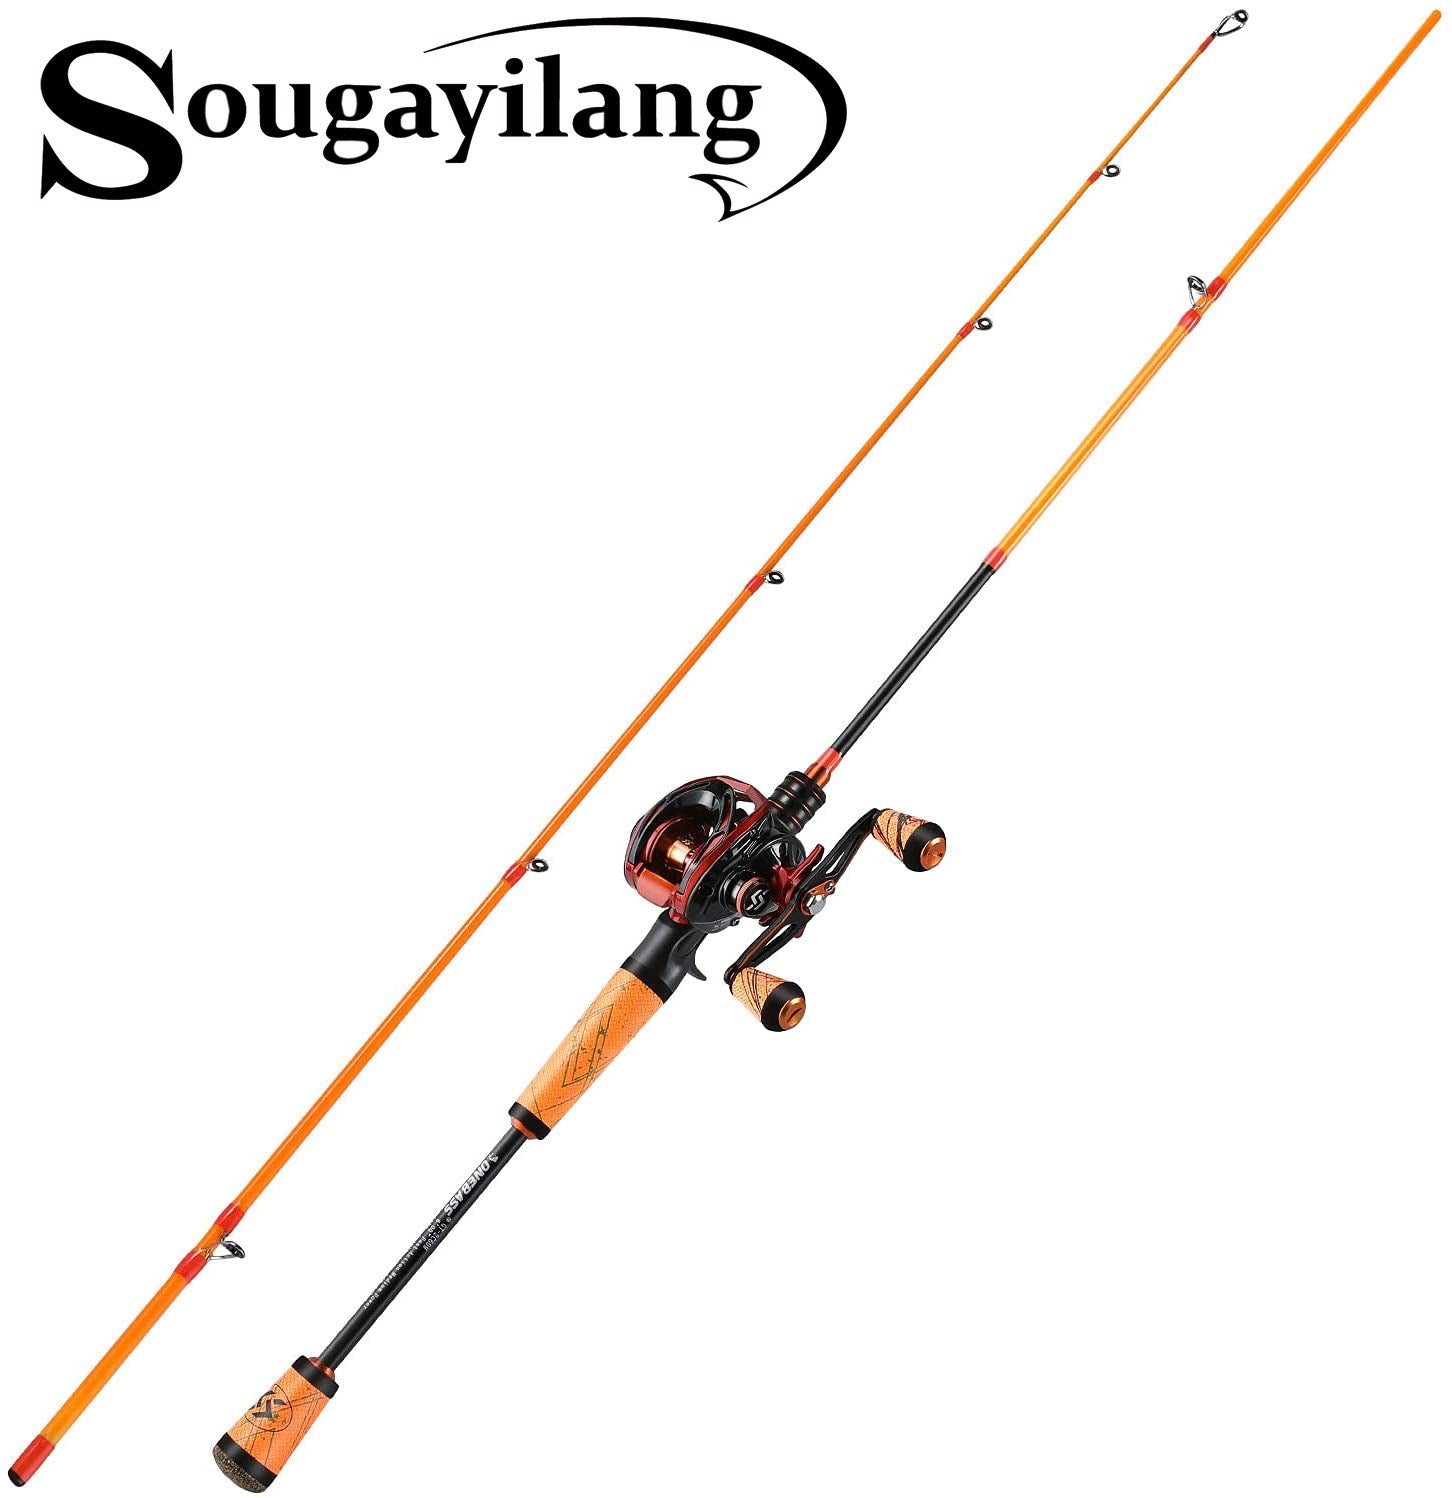 Halogen Spinning Rod and Reel Combo - 1 pc